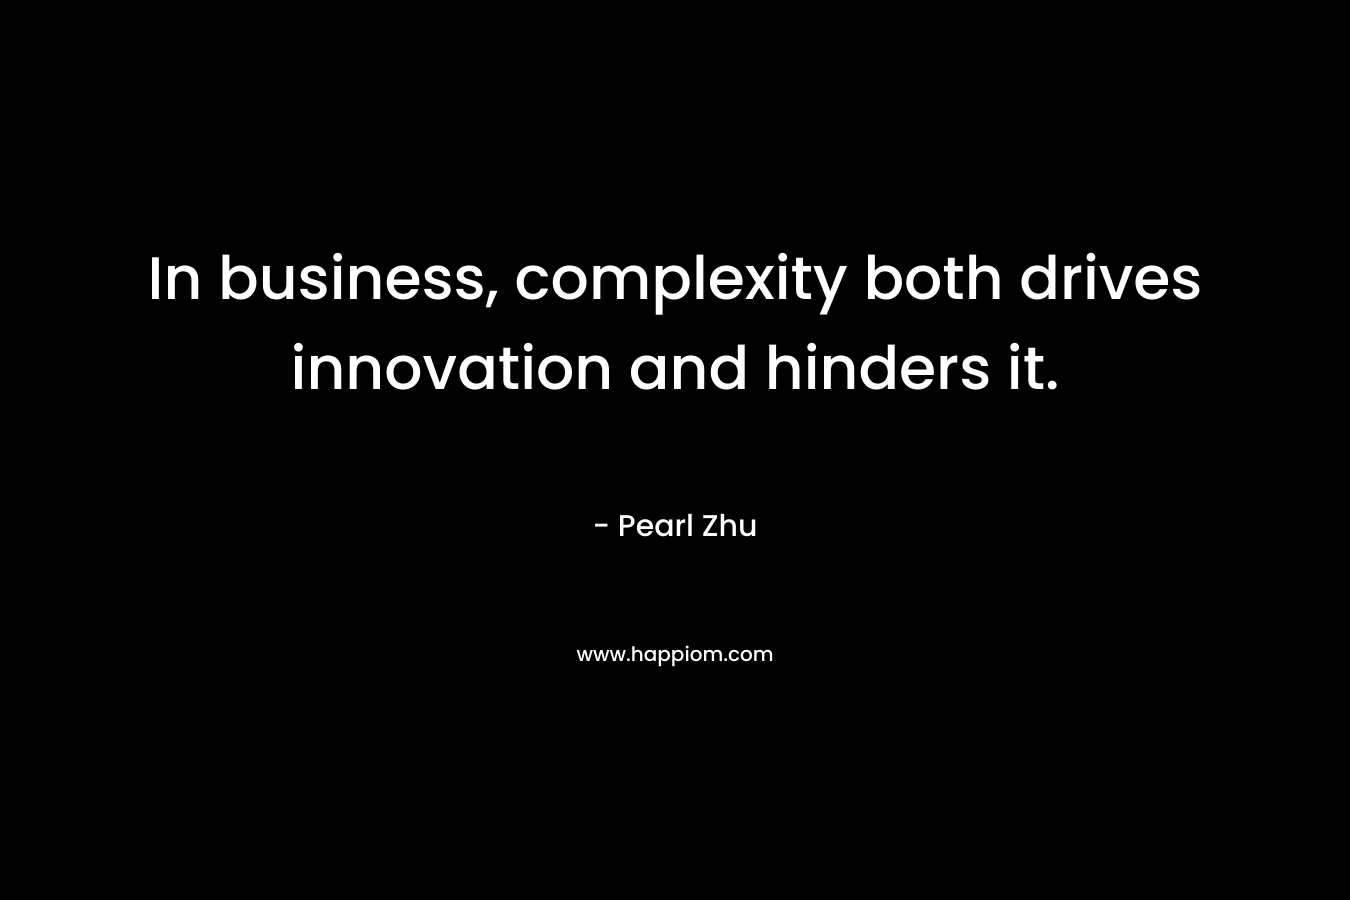 In business, complexity both drives innovation and hinders it.